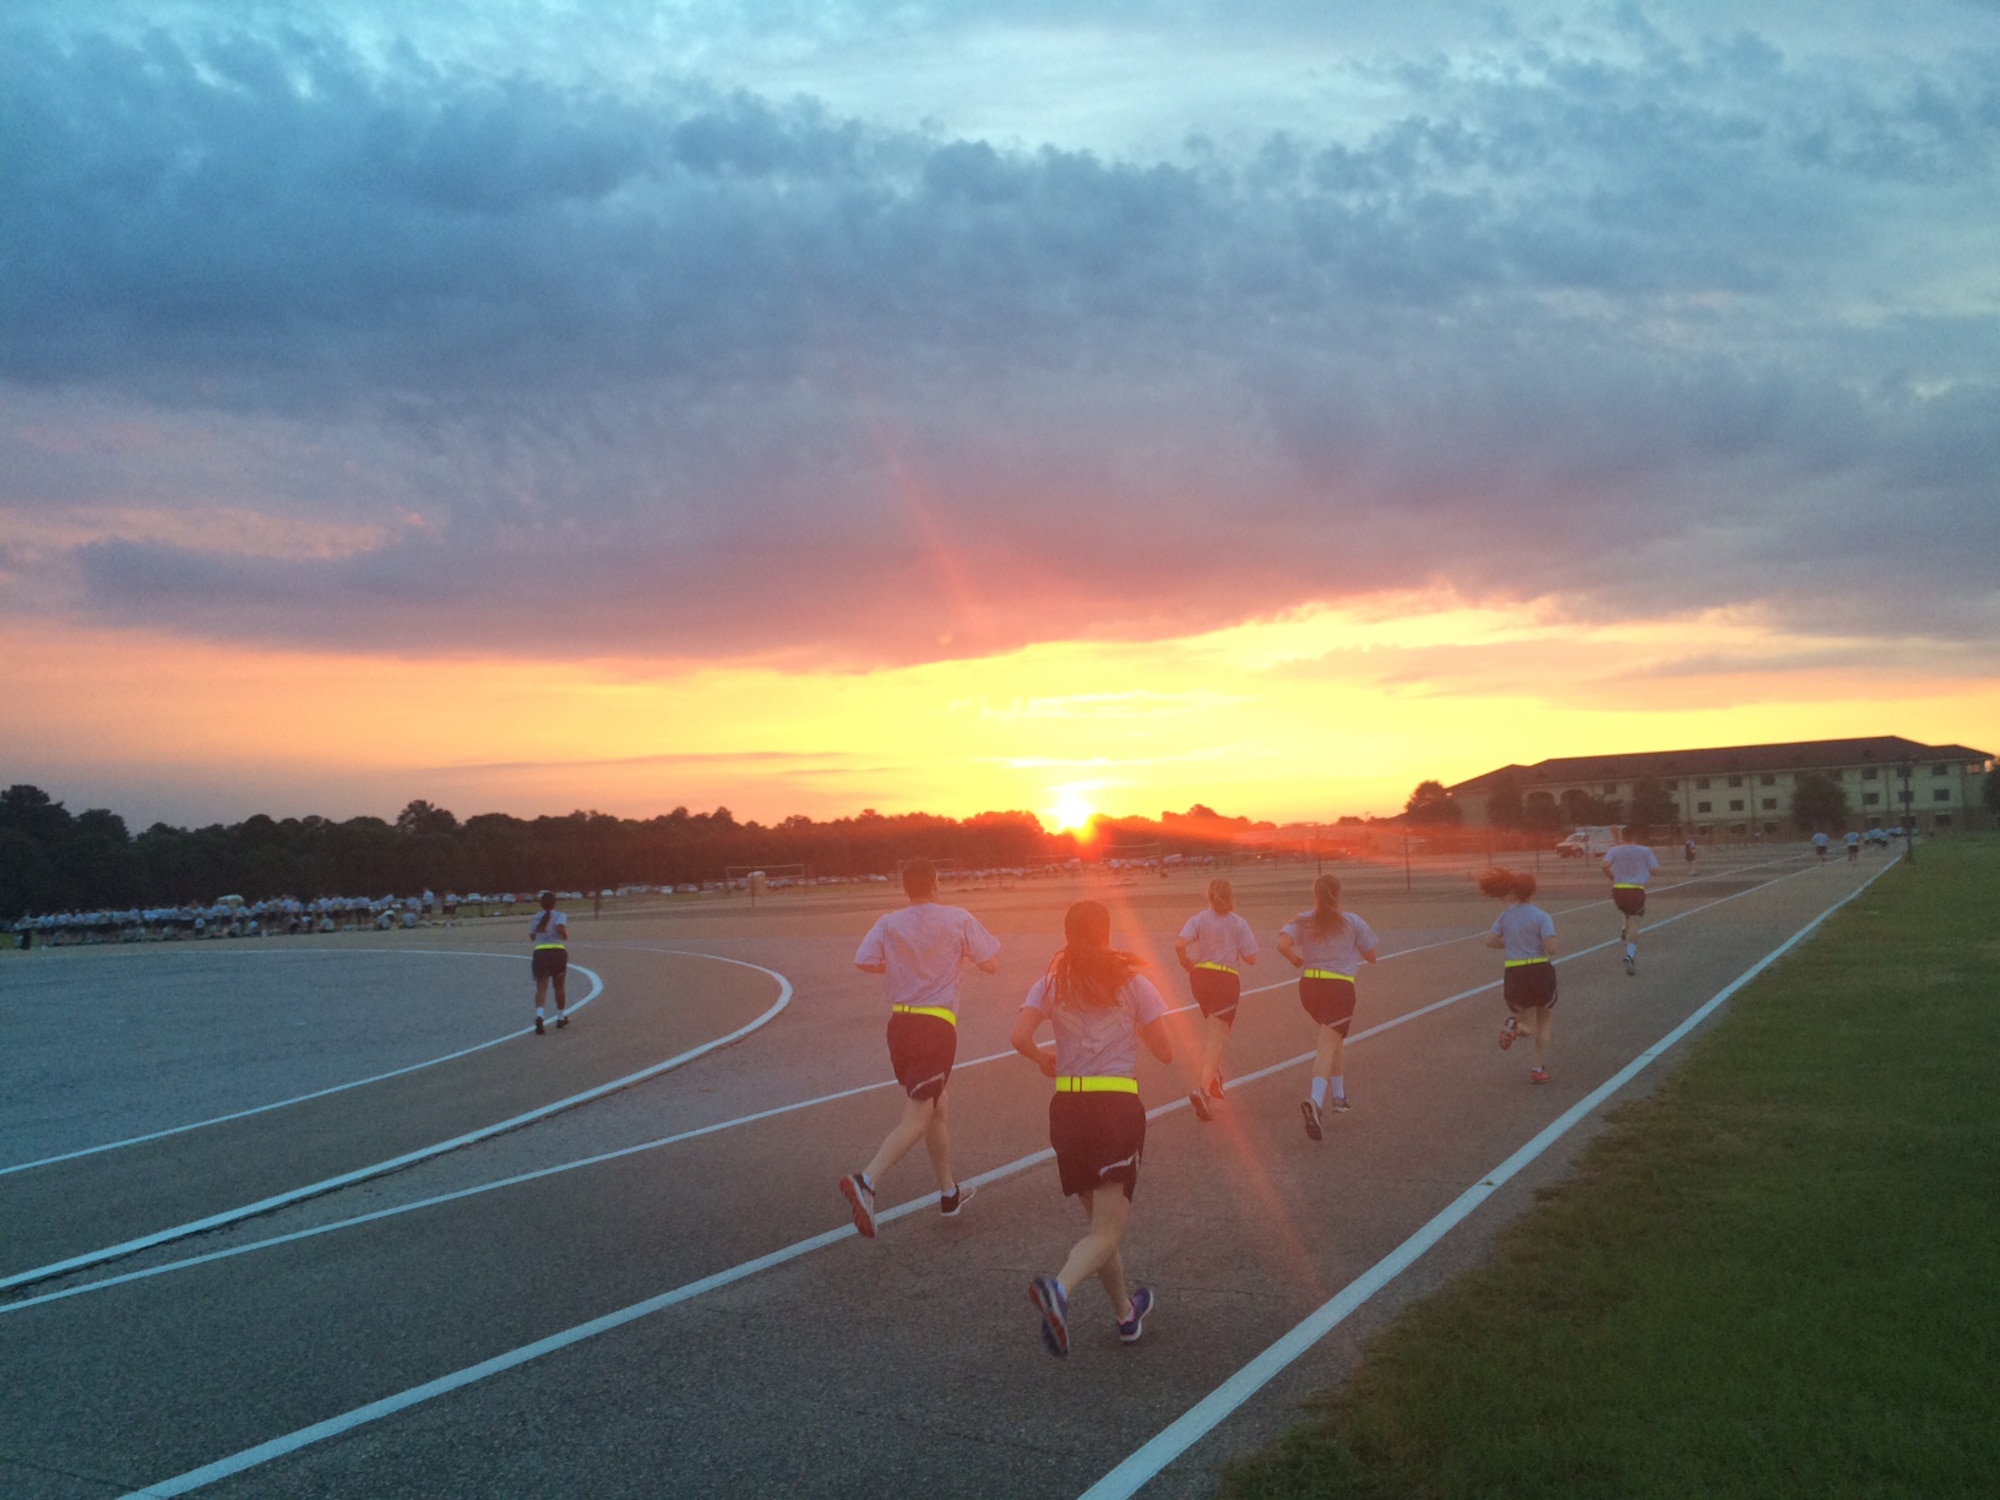 Students complete a pre-dawn physical fitness test to start their day.
